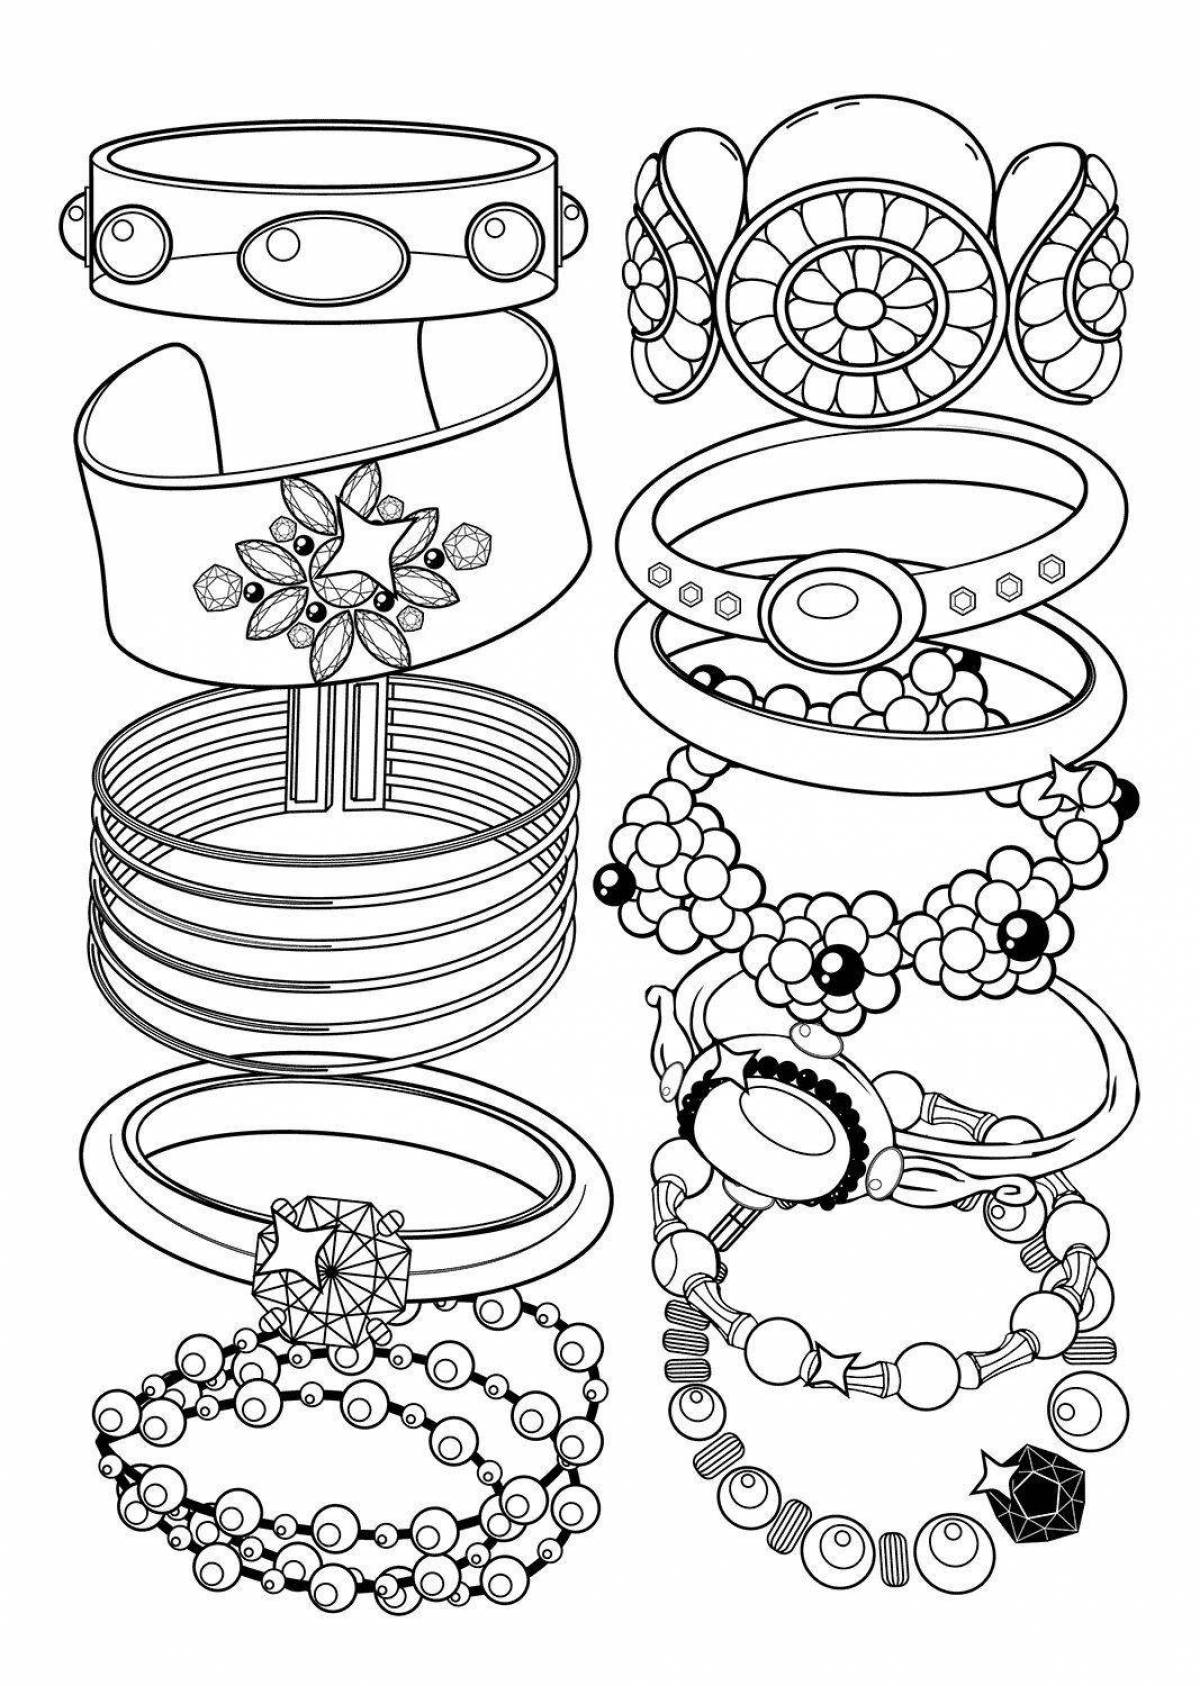 Coloring book accessories that explode with color